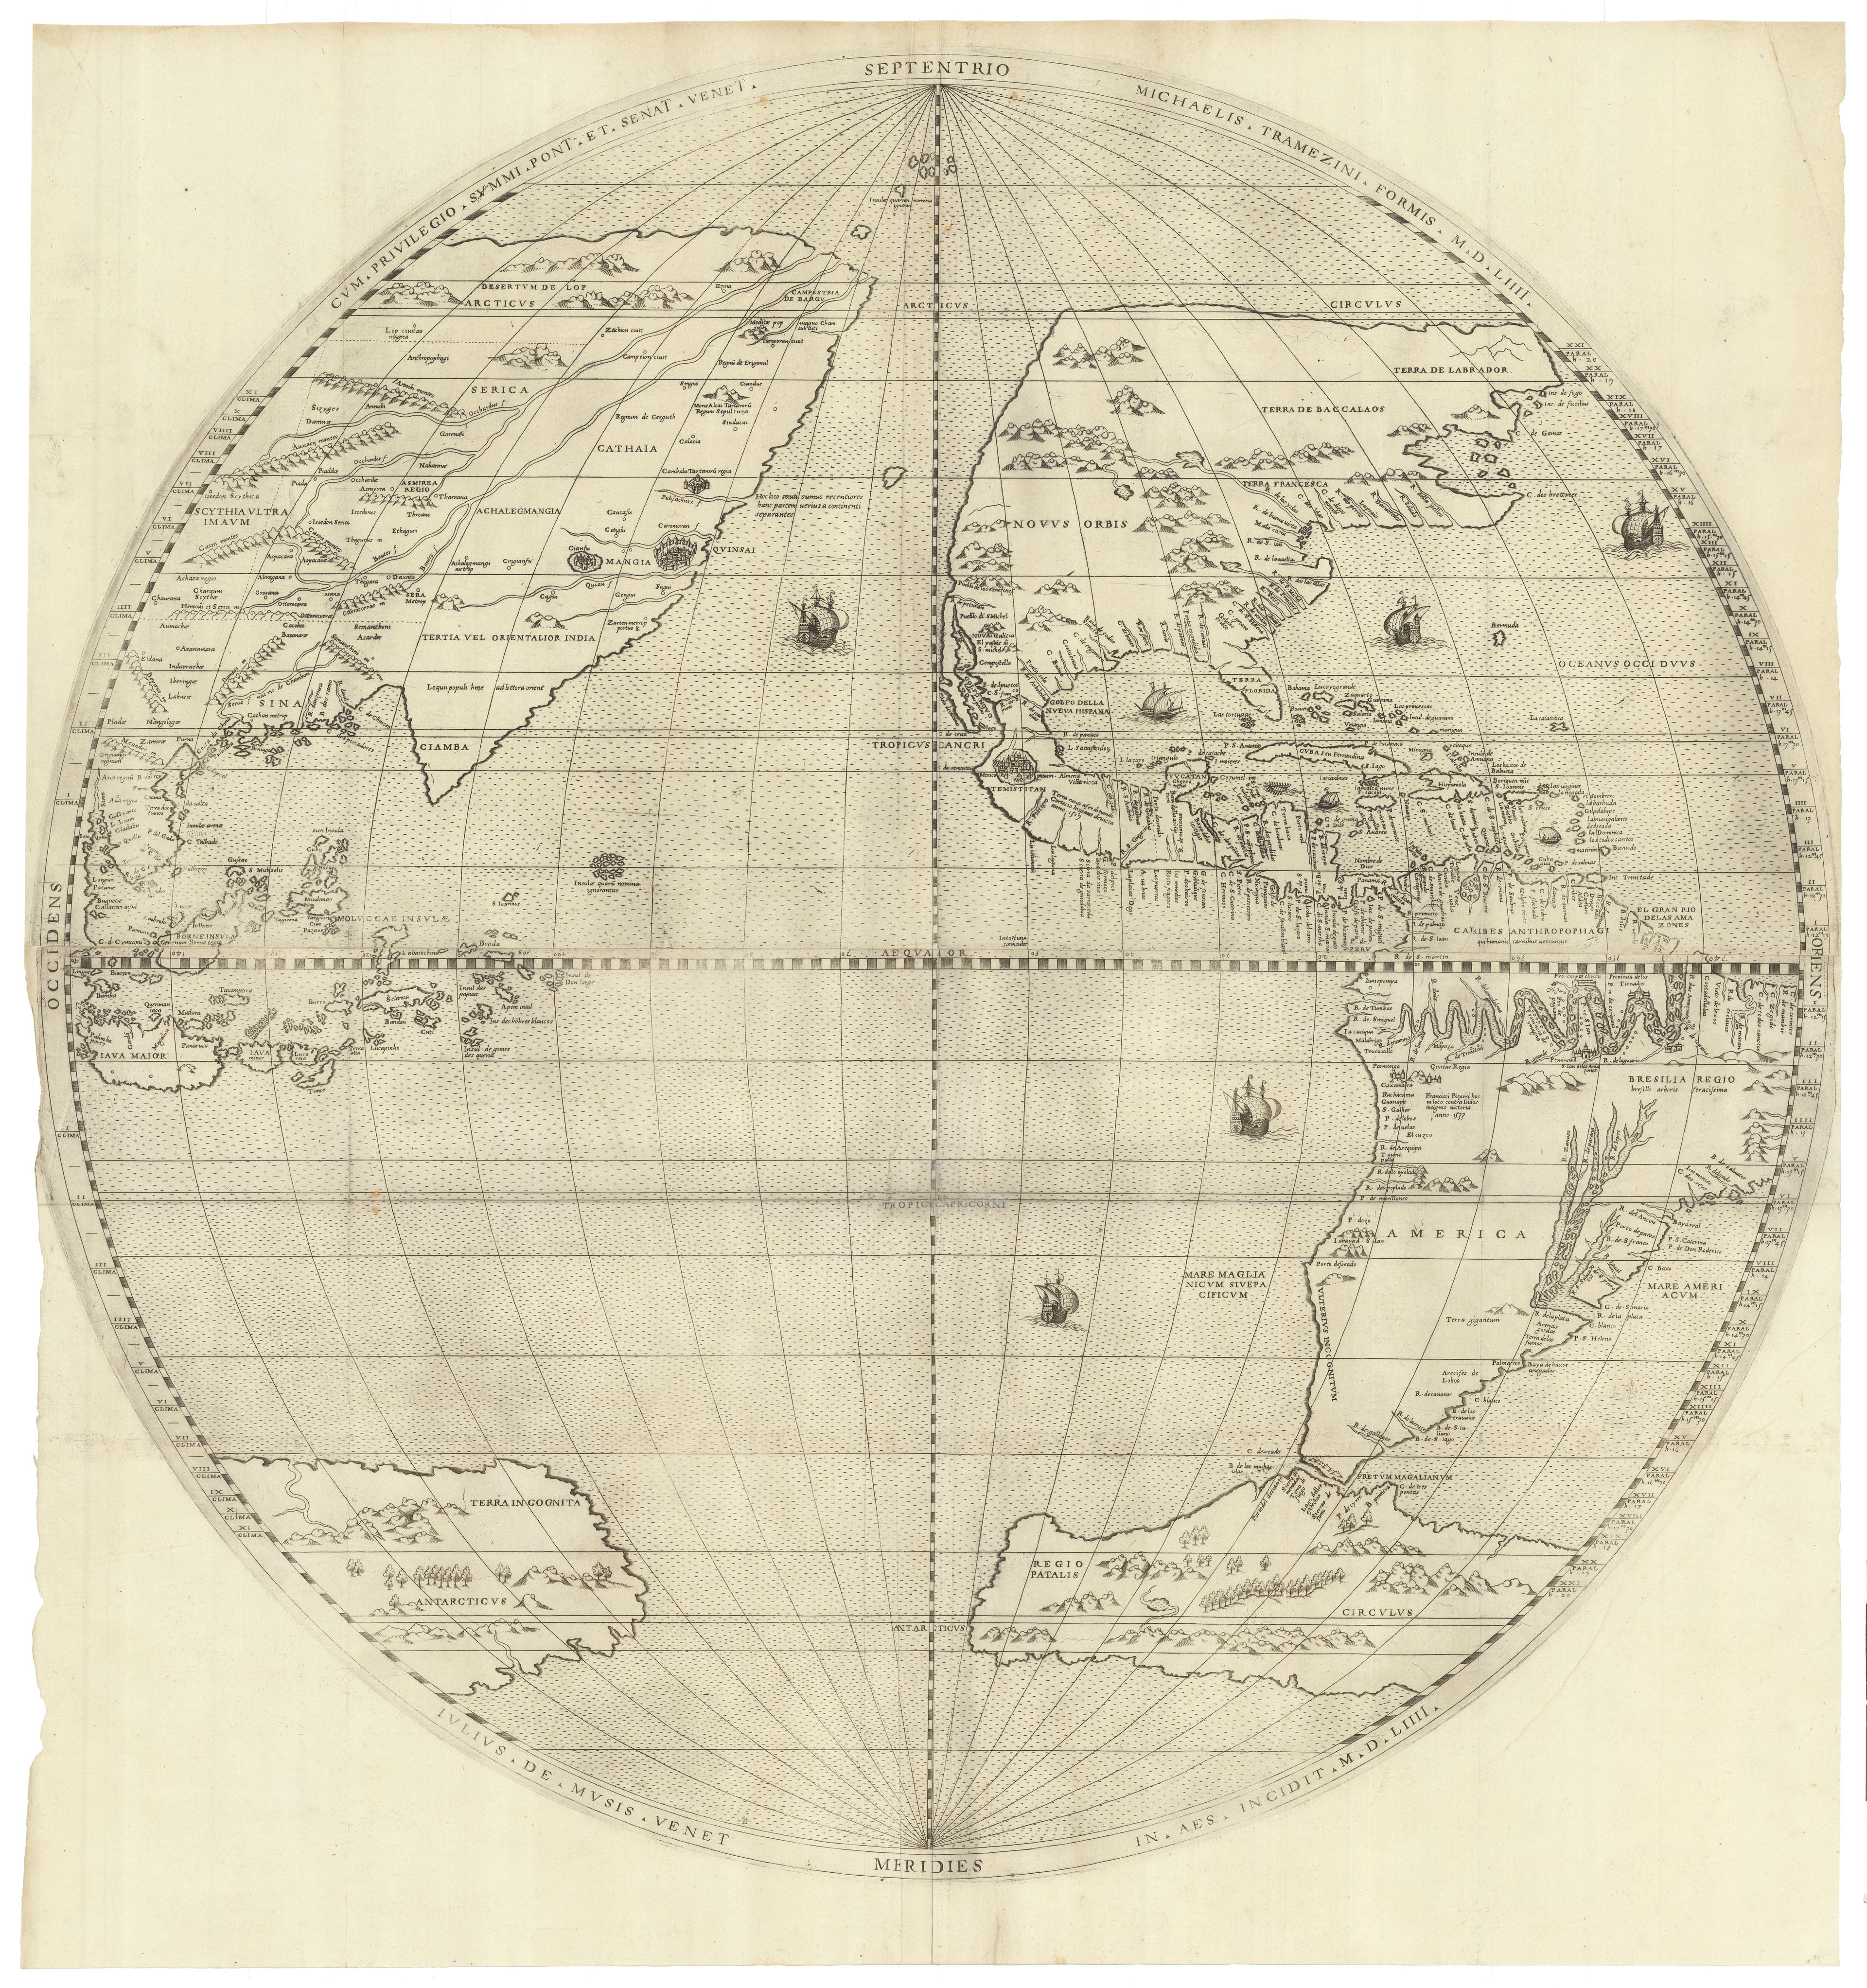 This example of a broadside shows the large Western Hemisphere map by Tramezzino. The map in finely engraved on copper plates and printed in black and white. The engraving is very fine and shows the Western hemisphere of the earth with sea monsters and ships in the ocean. The area surrounding the map is left empty.